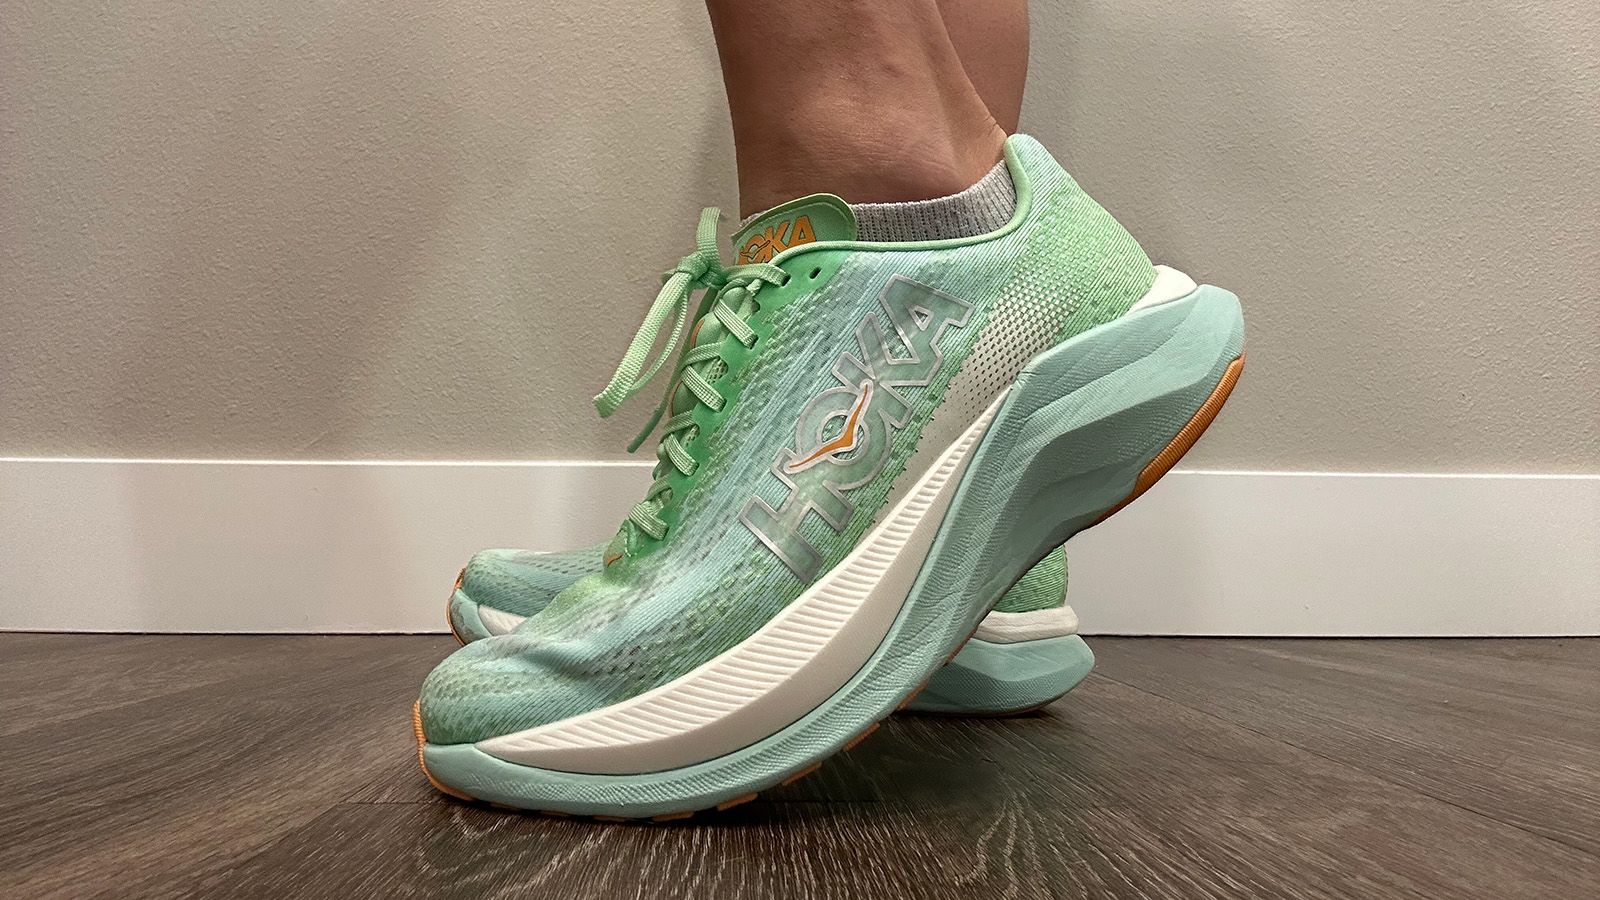 Hoka Mach X review: Tried and tested | CNN Underscored